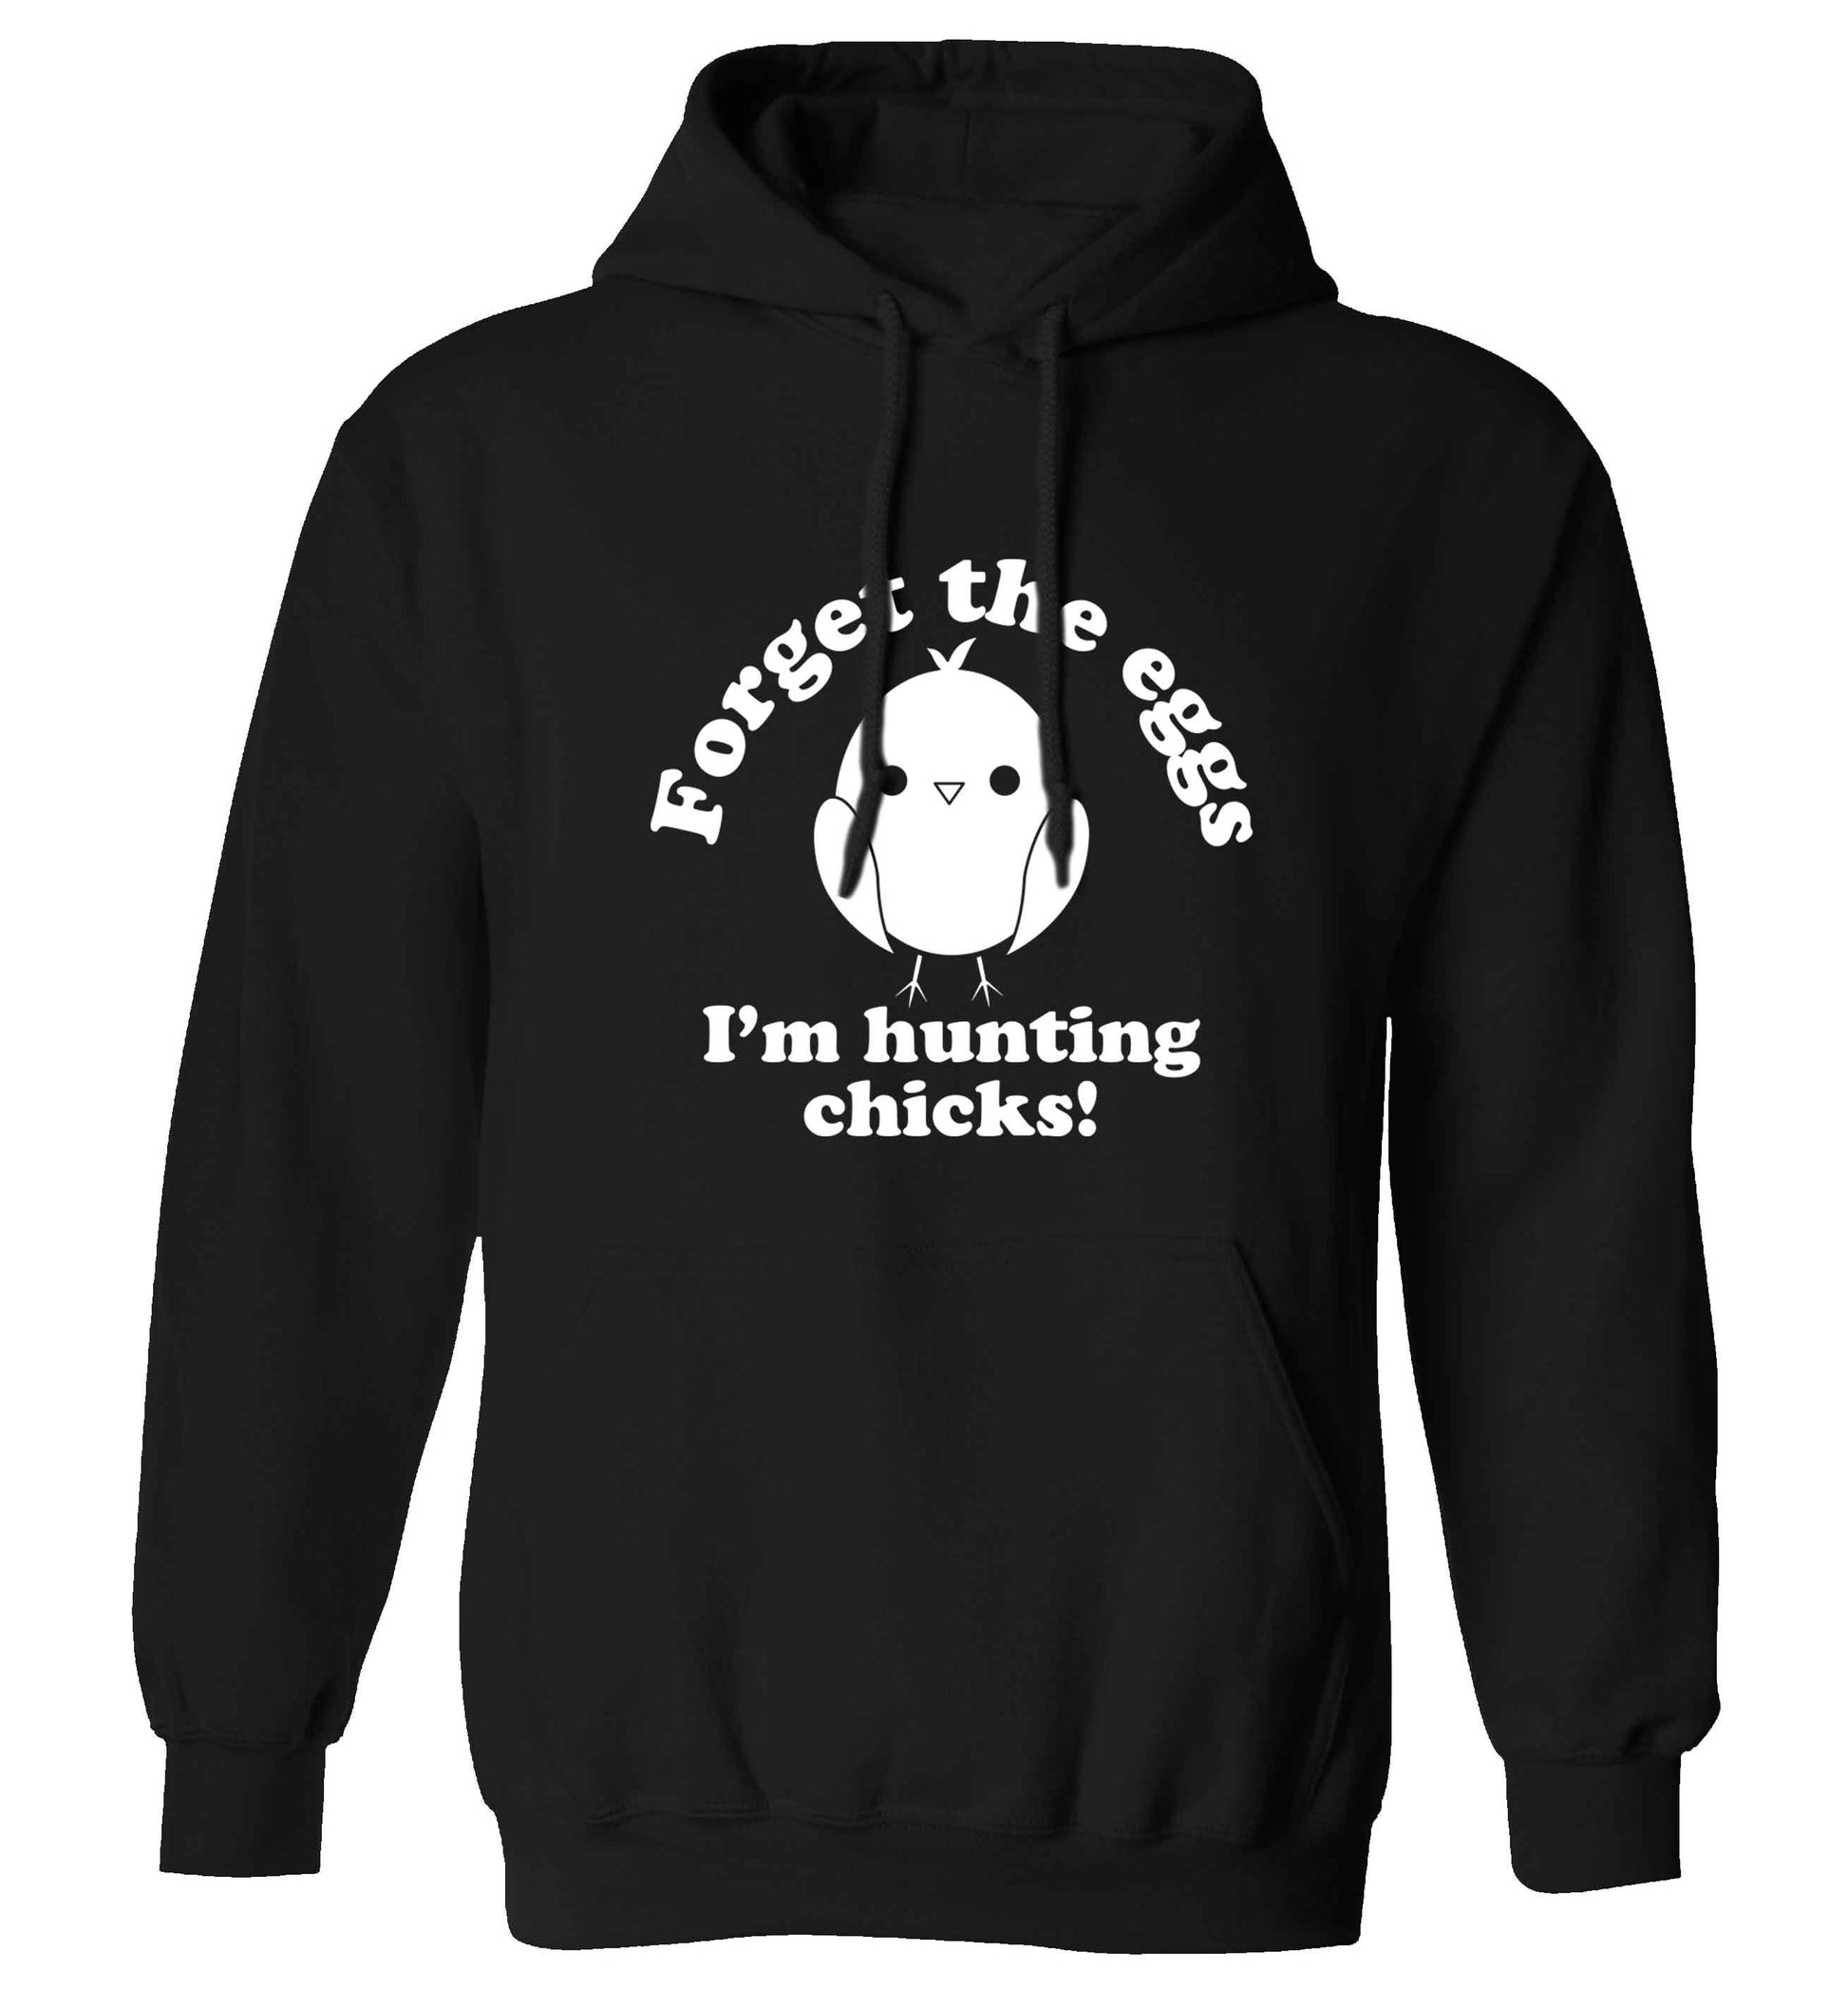 Forget the eggs I'm hunting chicks! adults unisex black hoodie 2XL